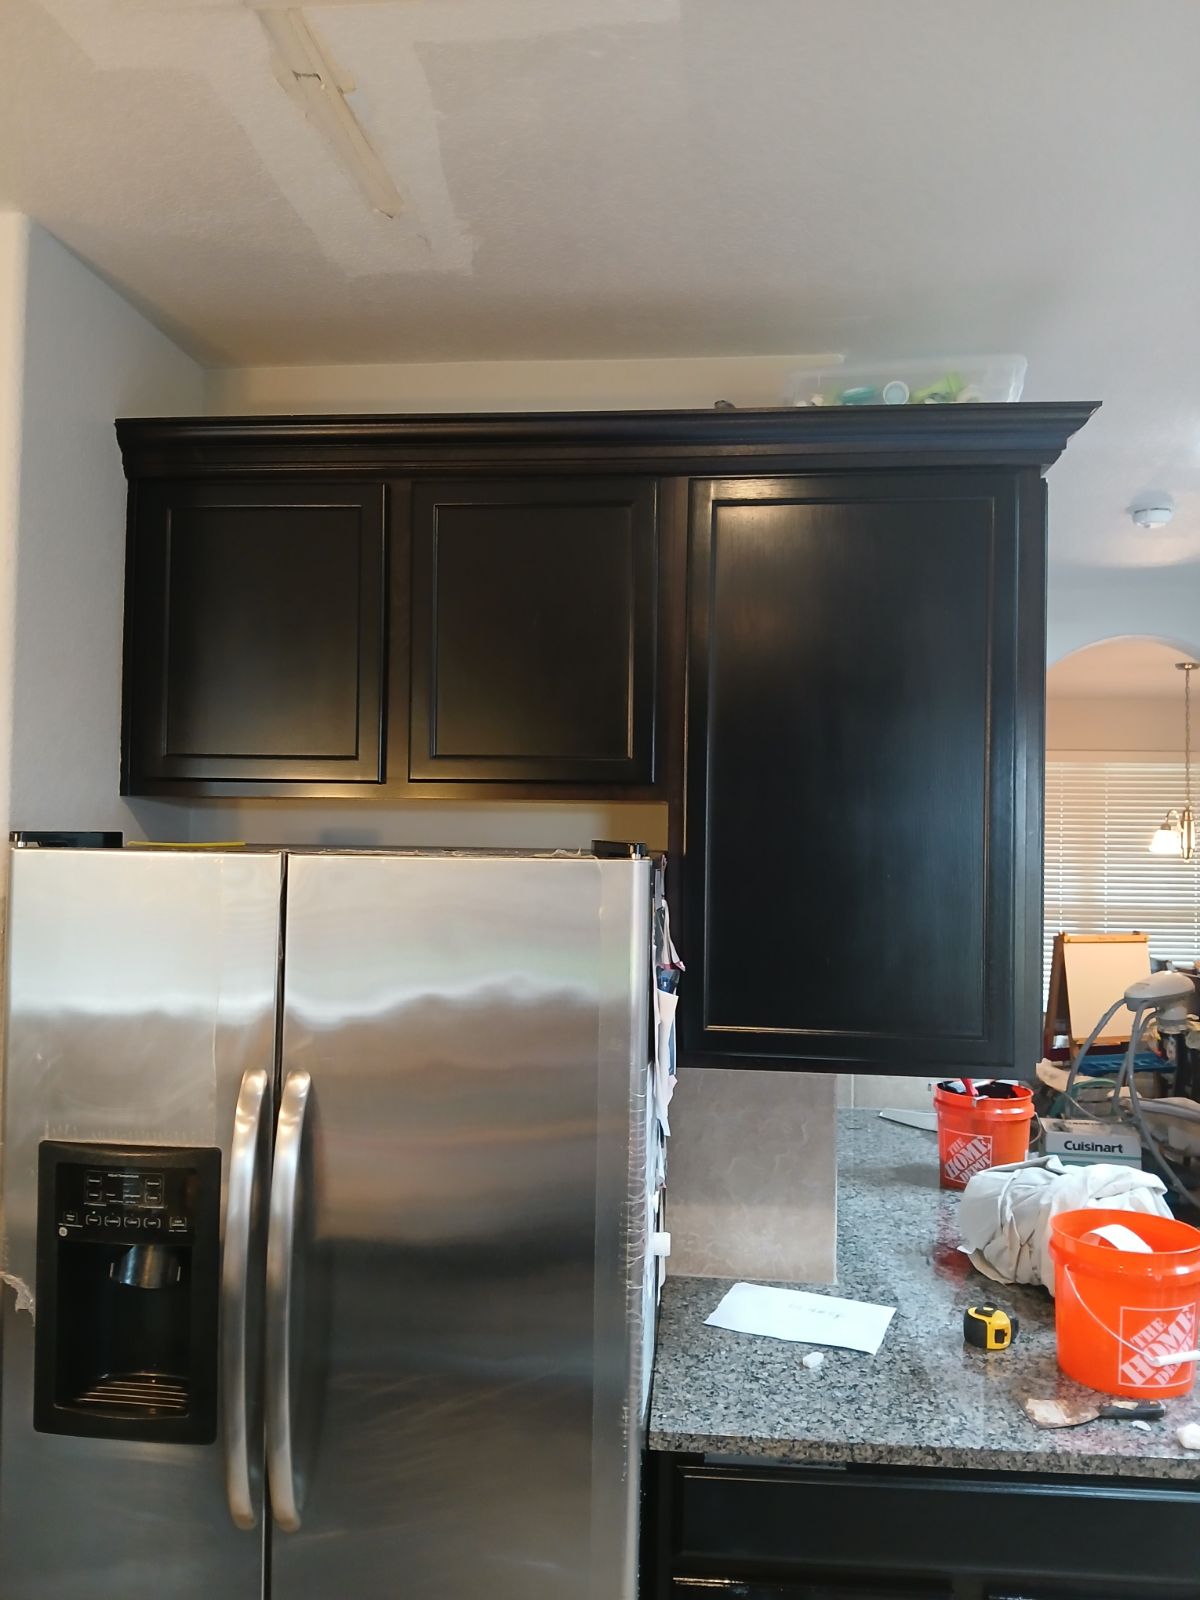 Top Quality Cabinet Painting In New Braunfels, TX Thumbnail